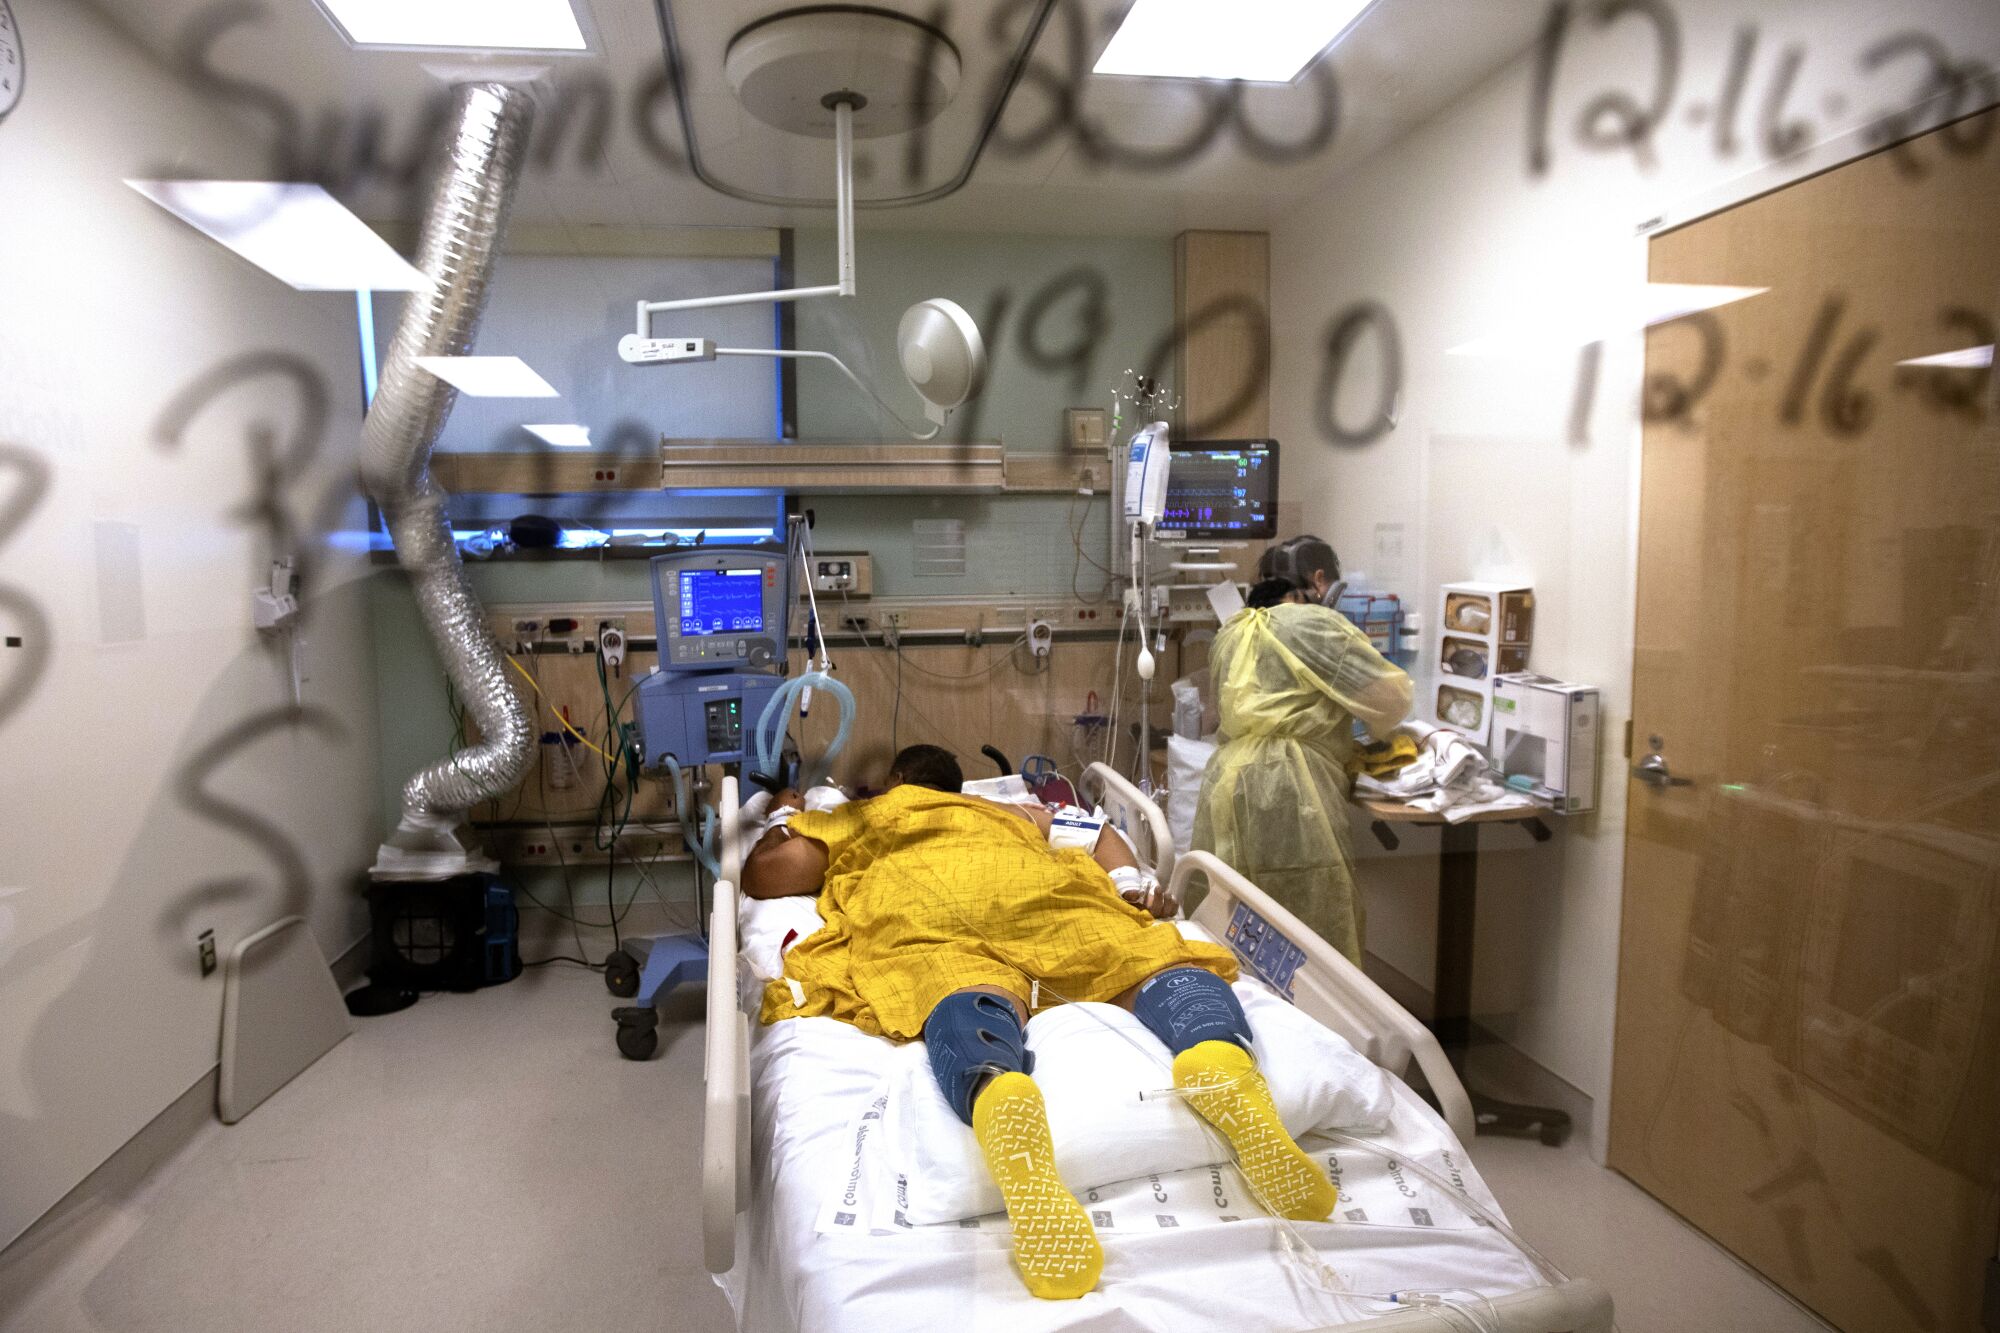 A patient lies face down on a hospital bed. A nurse in protective gear works nearby.